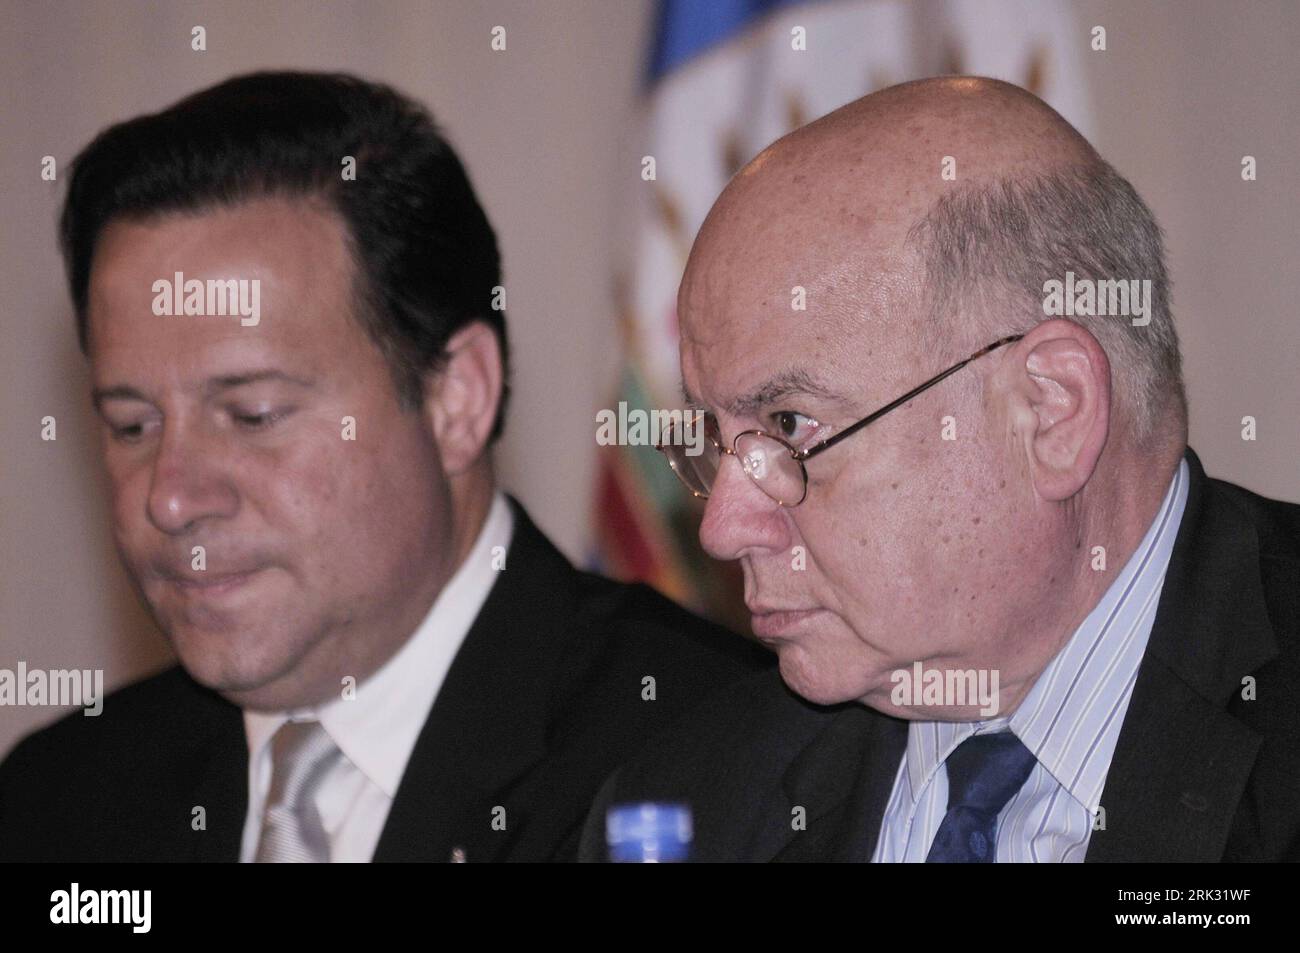 Bildnummer: 53289725  Datum: 25.08.2009  Copyright: imago/Xinhua (090826) -- TEGUCIGALPA, Aug. 26, 2009 (Xinhua) -- Jose Miguel Insulza (R), secretary general of the Organization of American States (OAS), and Panama s First Vice-President and Minister of Foreign Affairs Juan Carlos Varela attend a meeting in Tegucigalpa, , Aug. 25, 2009. A mission of the OAS in  seeking a solution to the country s political deadlock ended Tuesday without breakthrough. (Xinhua/Rafael Ochoa) (hdt) (2)HONDURAS-TEGUCIGALPA-OAS-END PUBLICATIONxNOTxINxCHN People Politik kbdig xcb 2009 quer premiumd o0 Chile    Bildn Stock Photo